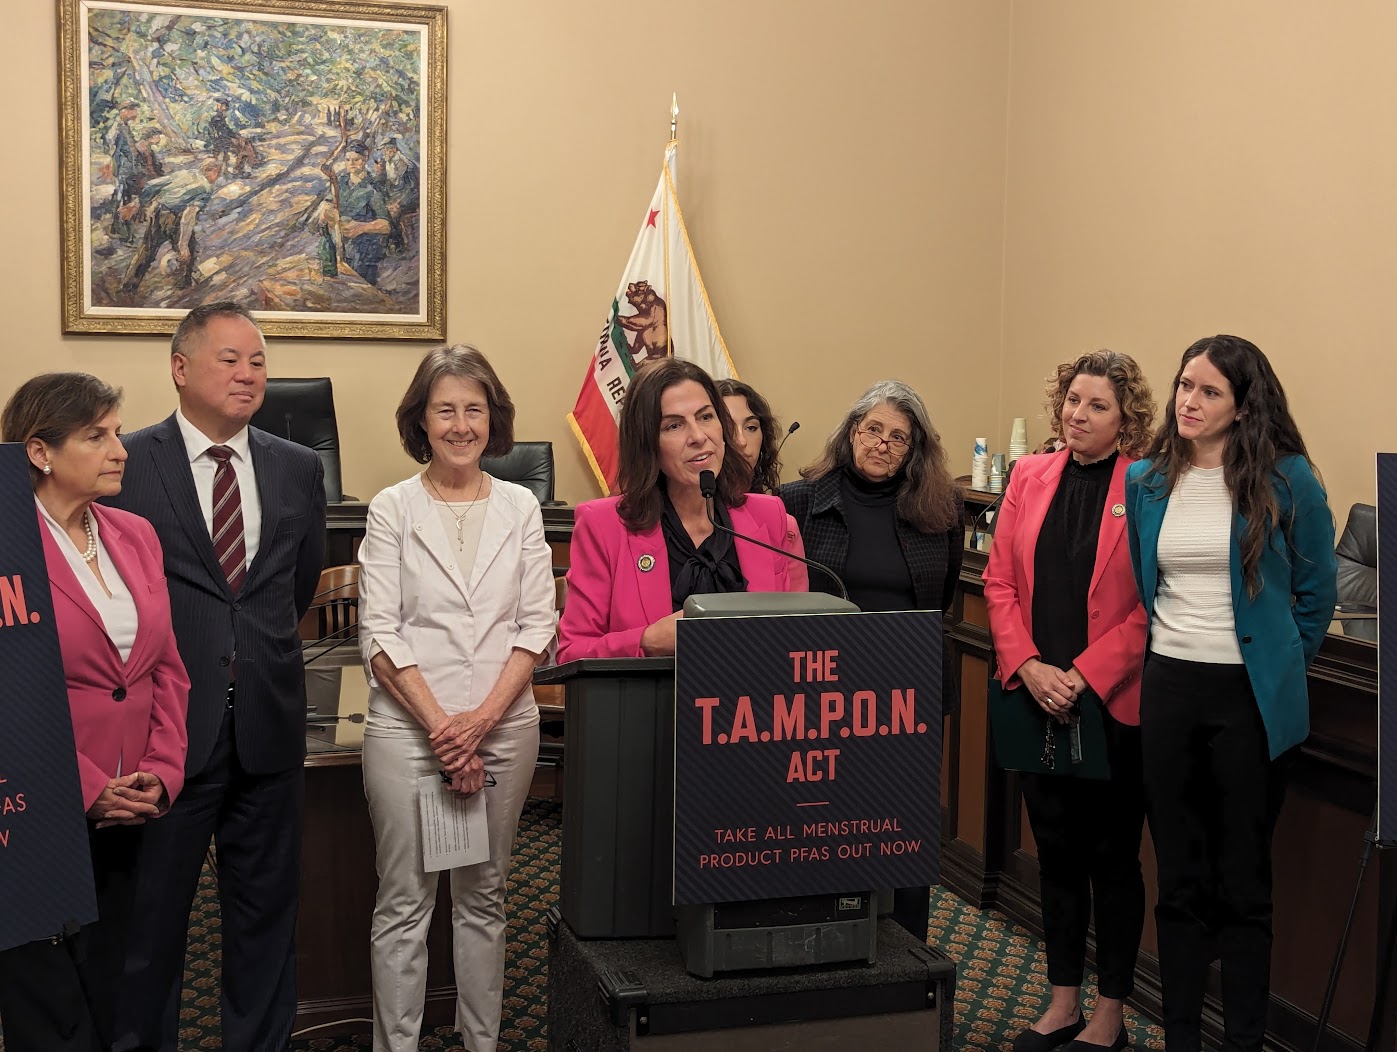 Assemblymember Diane Papan speaks about her legislation on removing PFAS chemicals out of women's hygine products. Press conf held in a committee room at tstate capitol. 